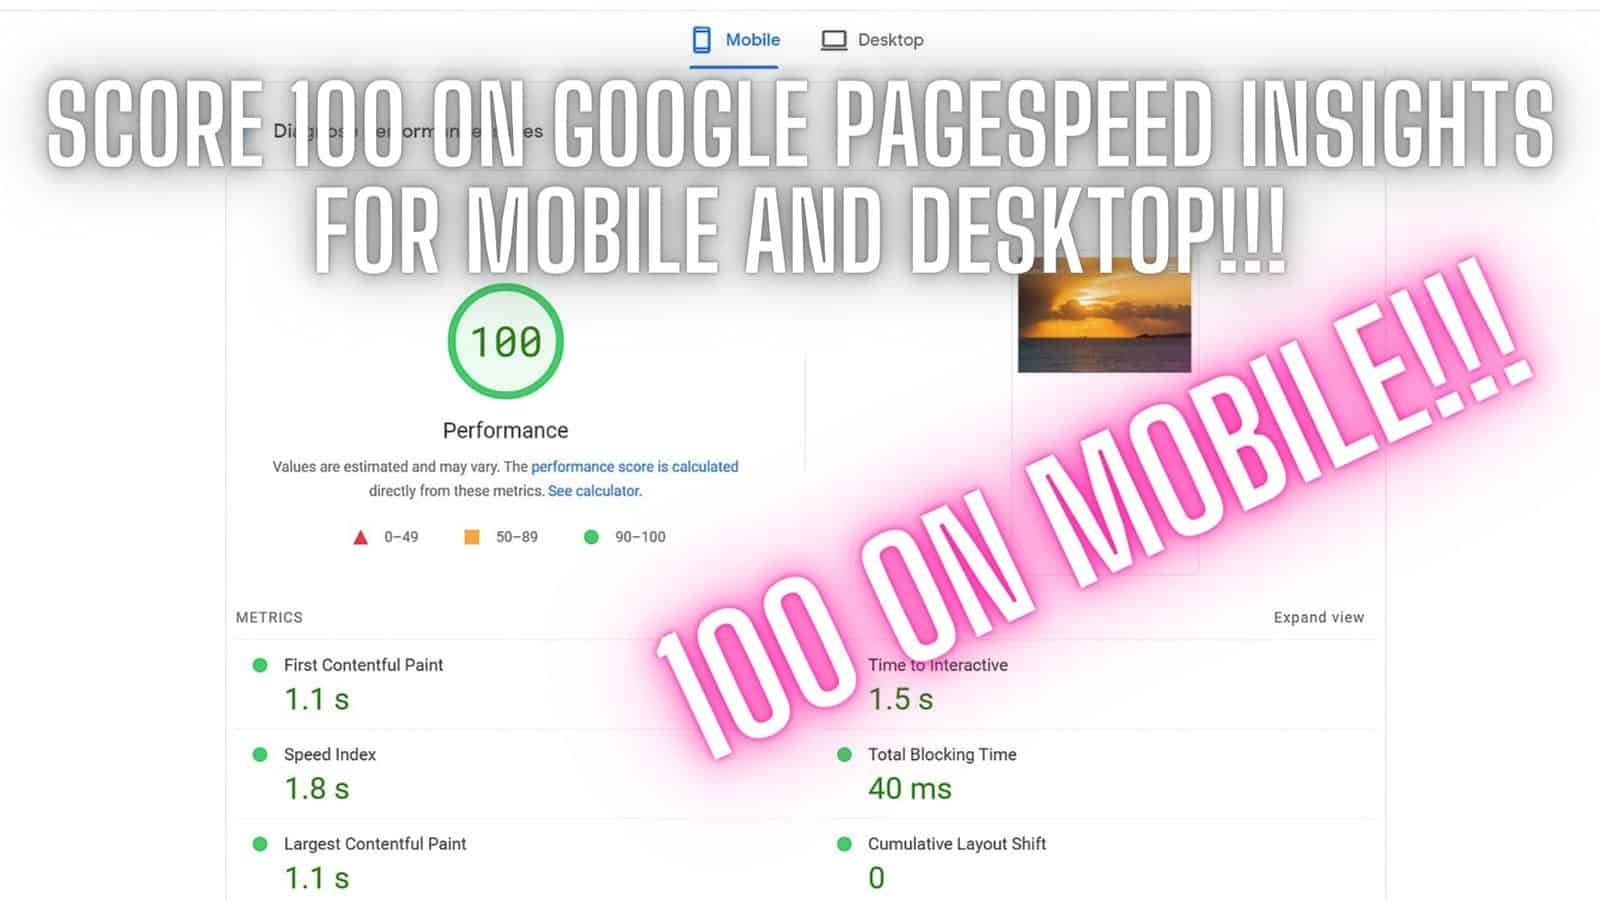 How to score 100 on mobile and desktop in google pagespeed insights.